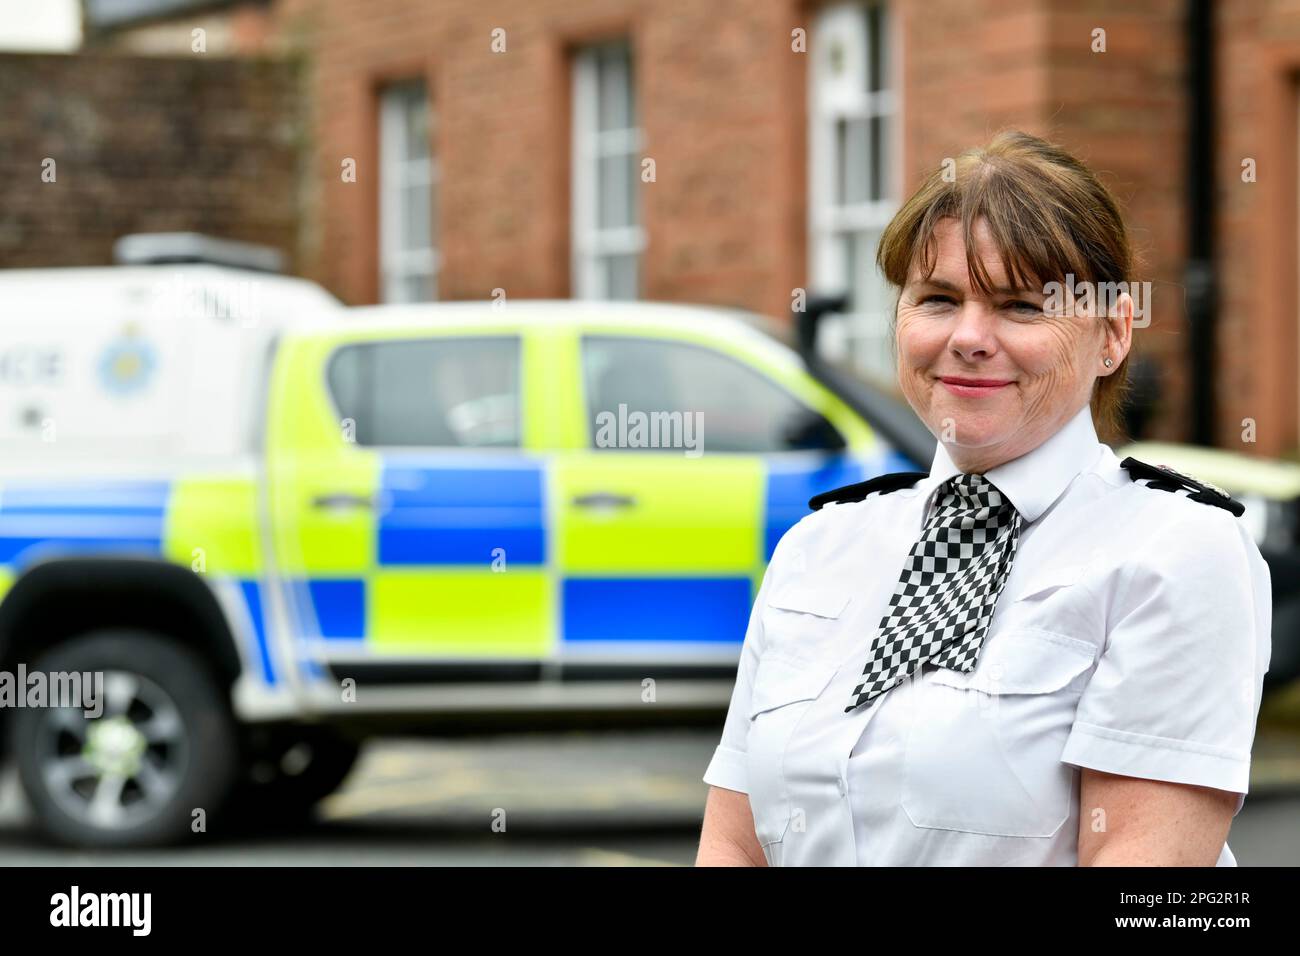 Cumbria Police Chief Constable Michelle Skeer. Photographed outside Police Headquarters Carlton Hall, Penrith, Cumbria Stock Photo